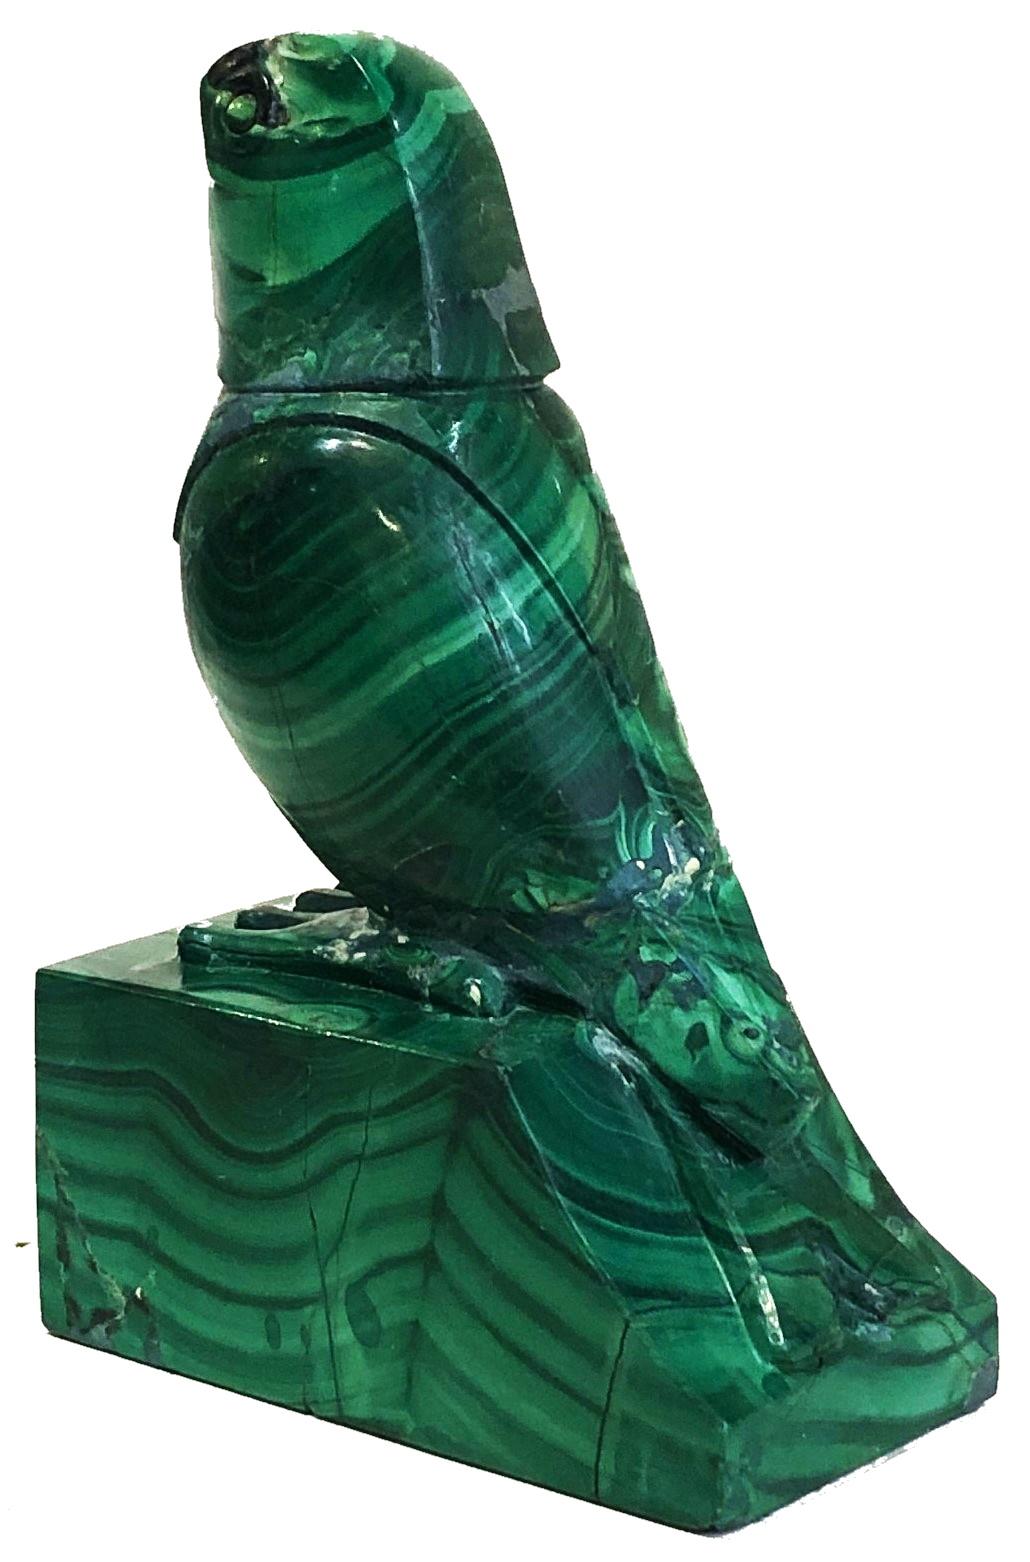 É. M. Sandoz, Art Deco Cubist Sculpture of Parrot in Carved Malachite, ca. 1920s In Fair Condition For Sale In New York, NY